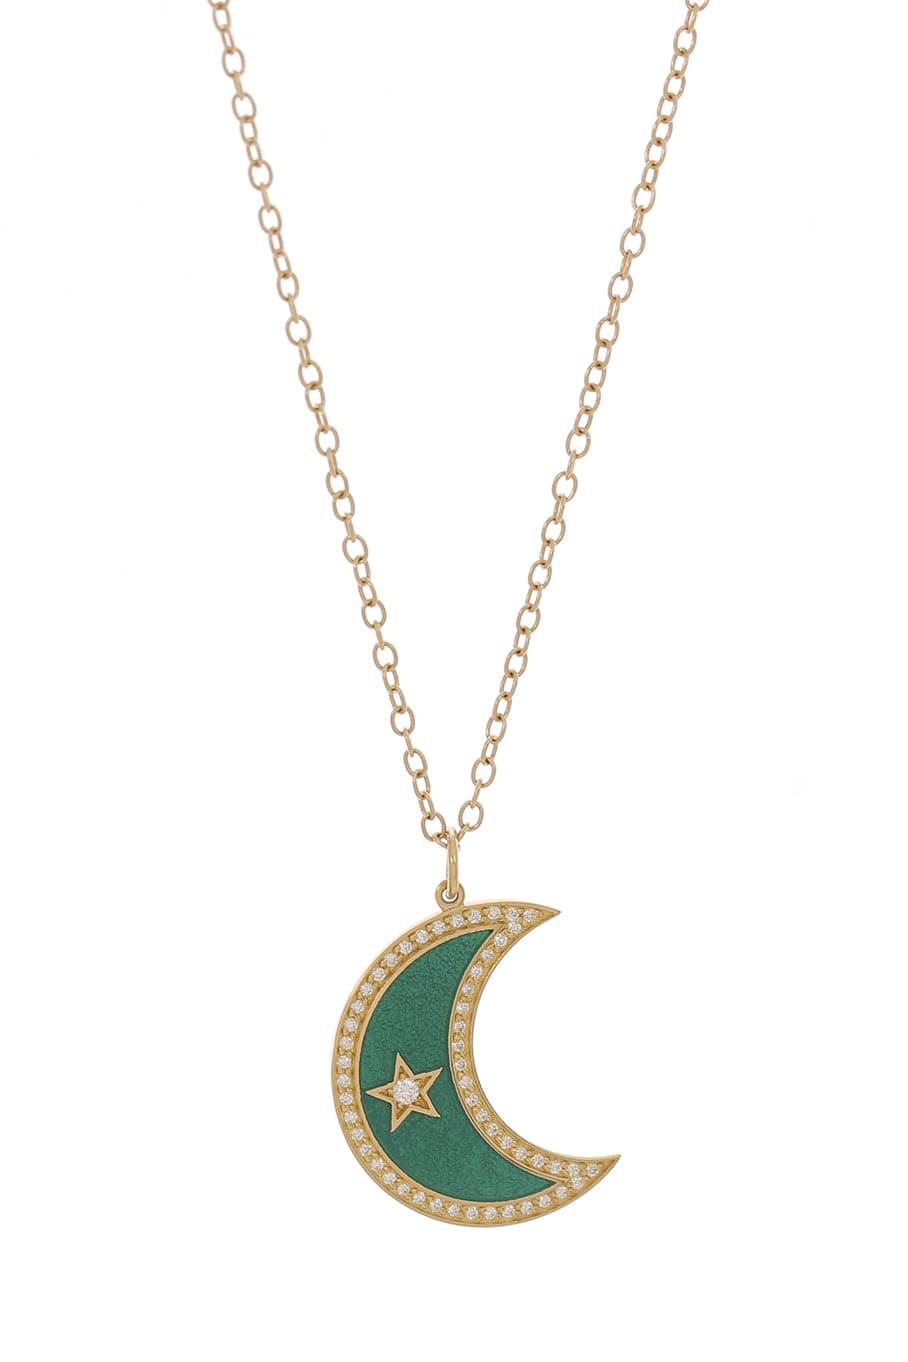 ANDREA FOHRMAN-Large Peacock Crescent Moon Necklace-YELLOW GOLD